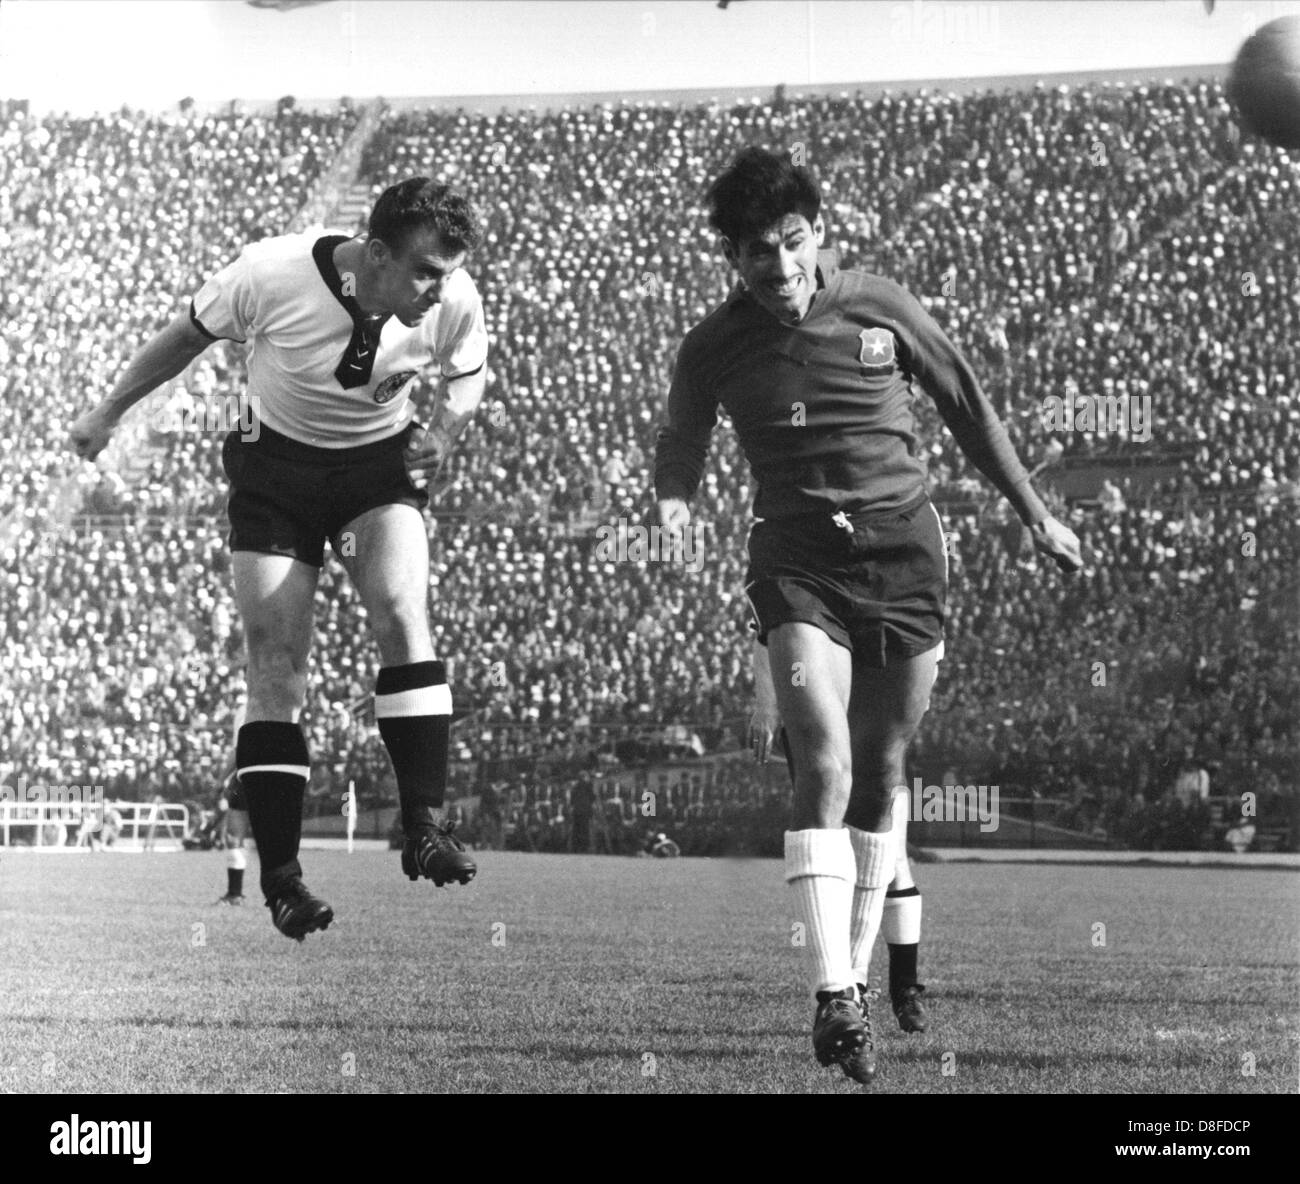 Hans Schaefer (left) and Chilean Landa duel for the ball. Germany beat the heavily favoured Chilean team during the 1962 World Cup preliminary round game at the  Stadion Nacional in Santiago de Chile, Chile on 6 June 1962. The first German goal came in the 21st minute on a penalty shot by Szymaniak after a foul on Uwe Seeler and in the 81st minute Seeler himself scored the 2-0 with a header. Chile finished second in the group, Italy and Switzerland were eliminated from the competition. Stock Photo